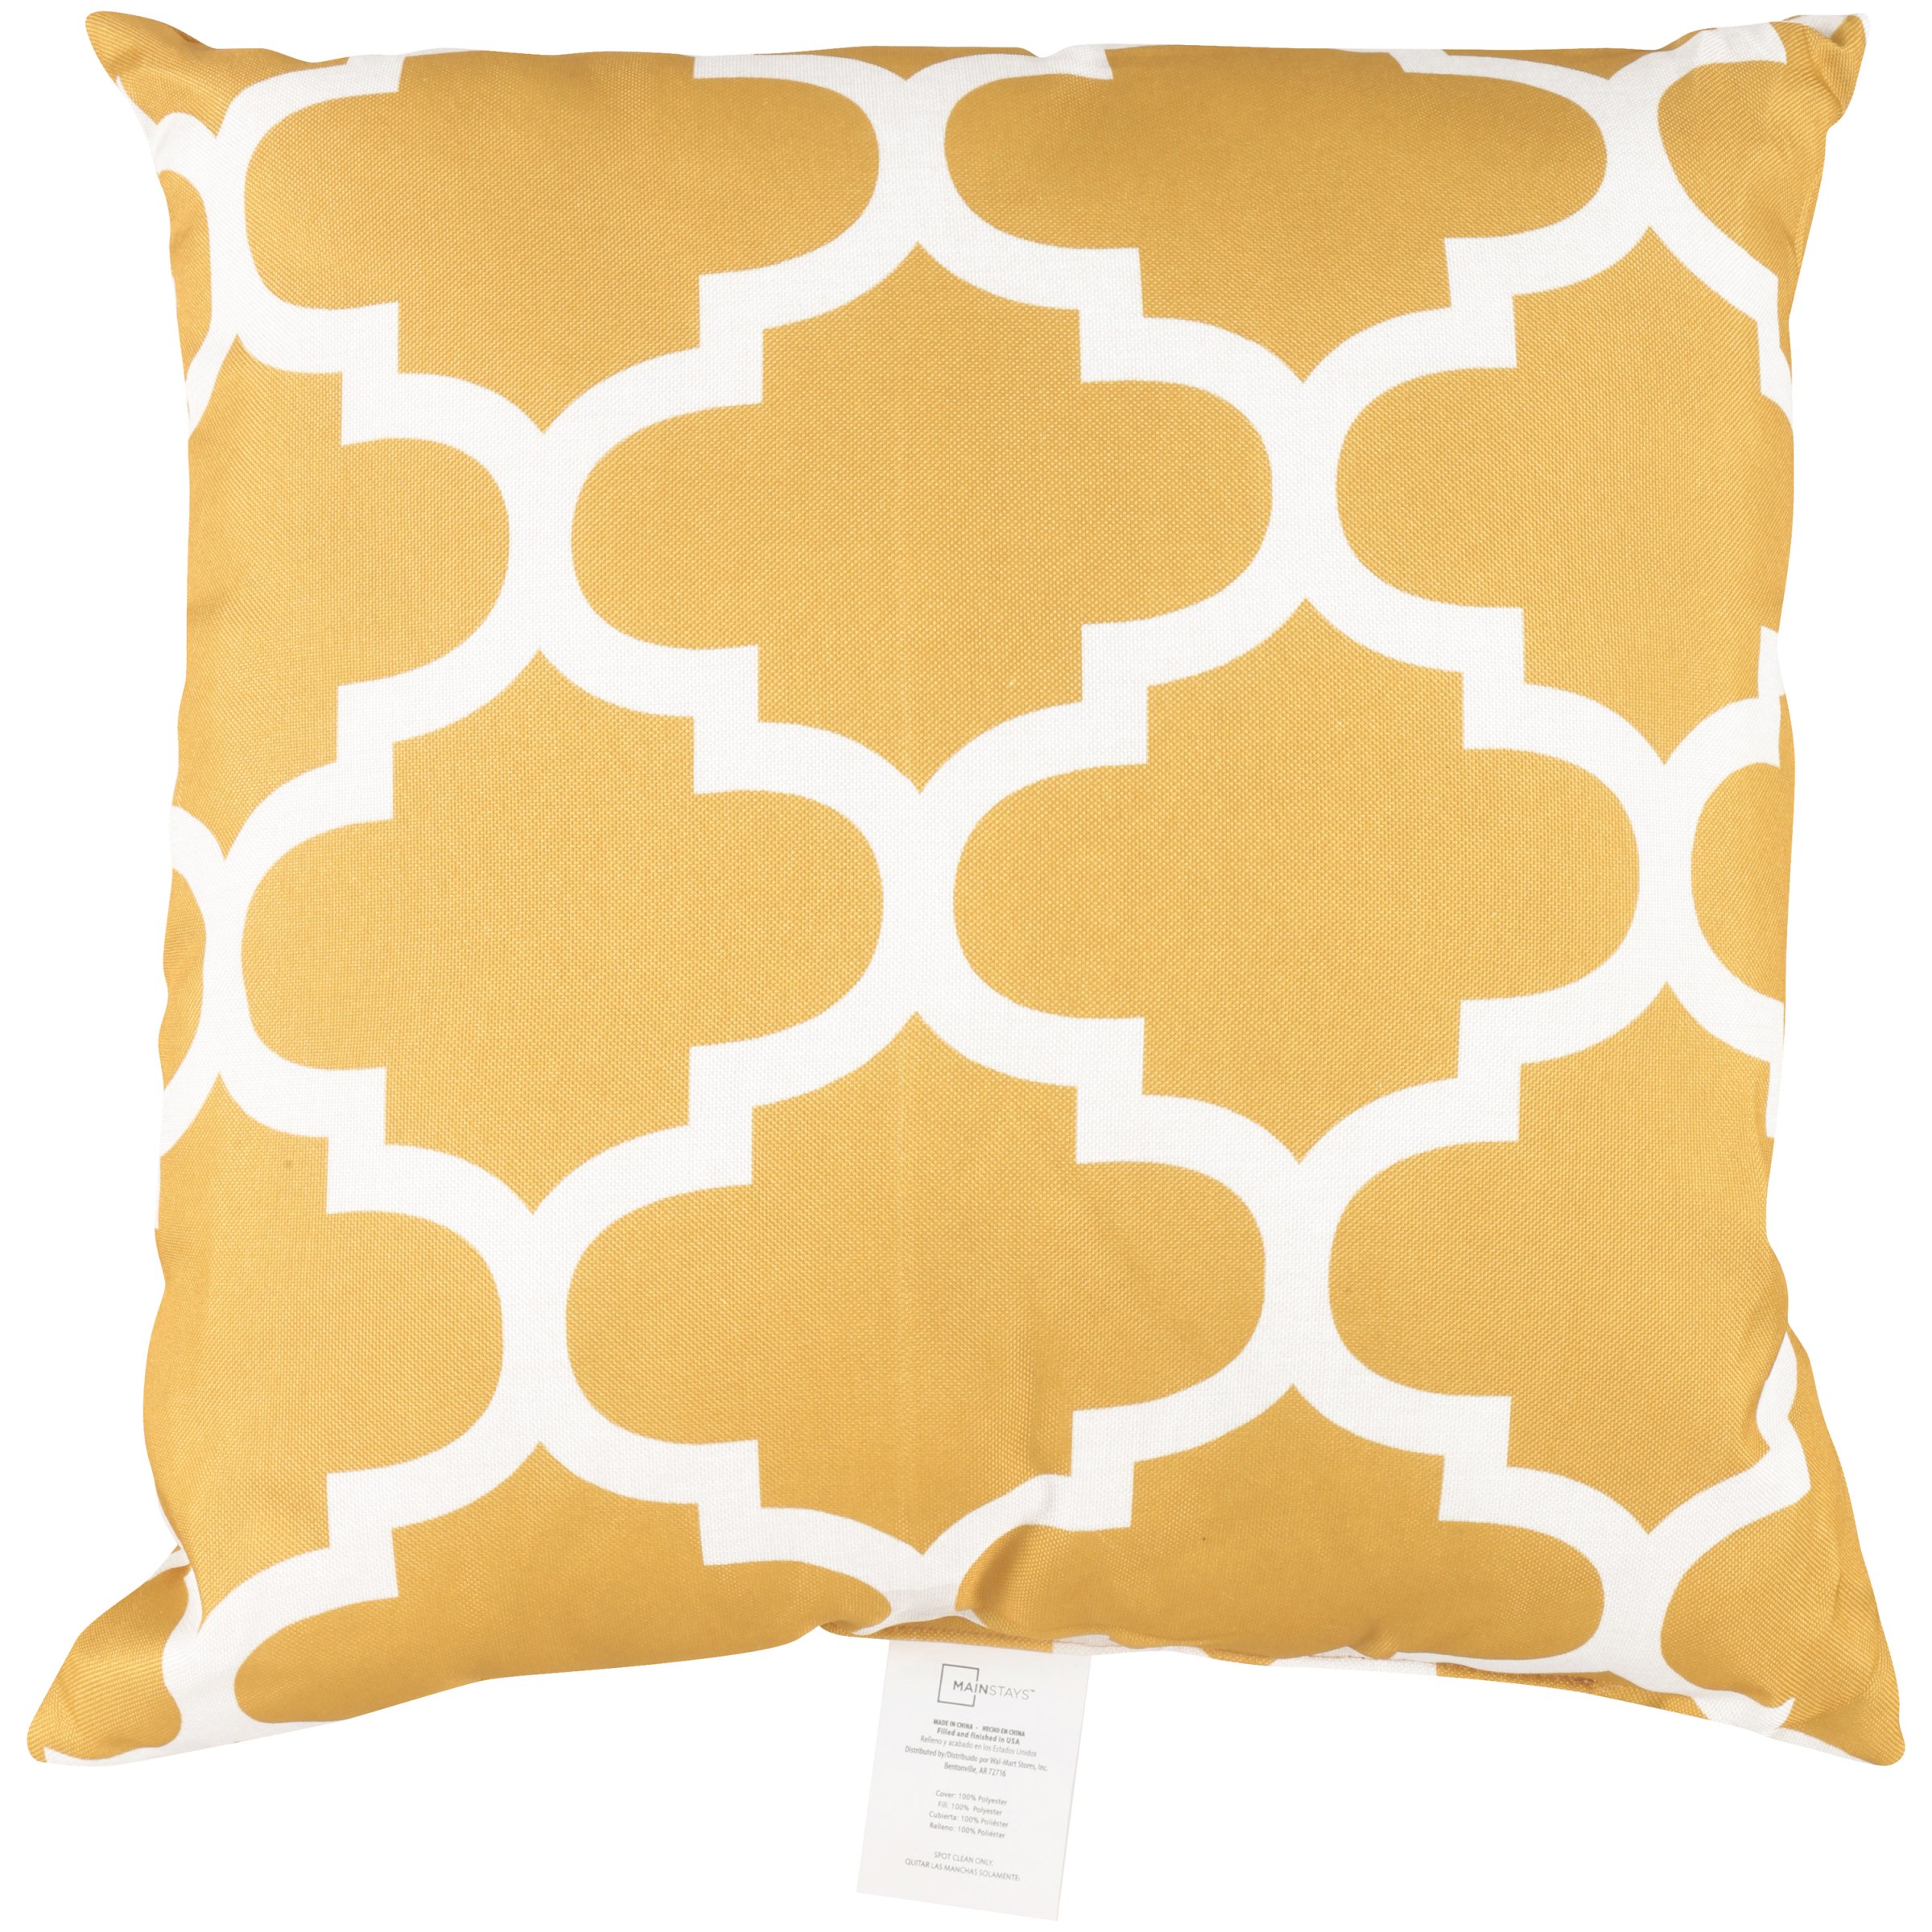 Mainstays Fretwork Square Decorative Pillow, 18" x 18", Gold, 1PC - image 2 of 2